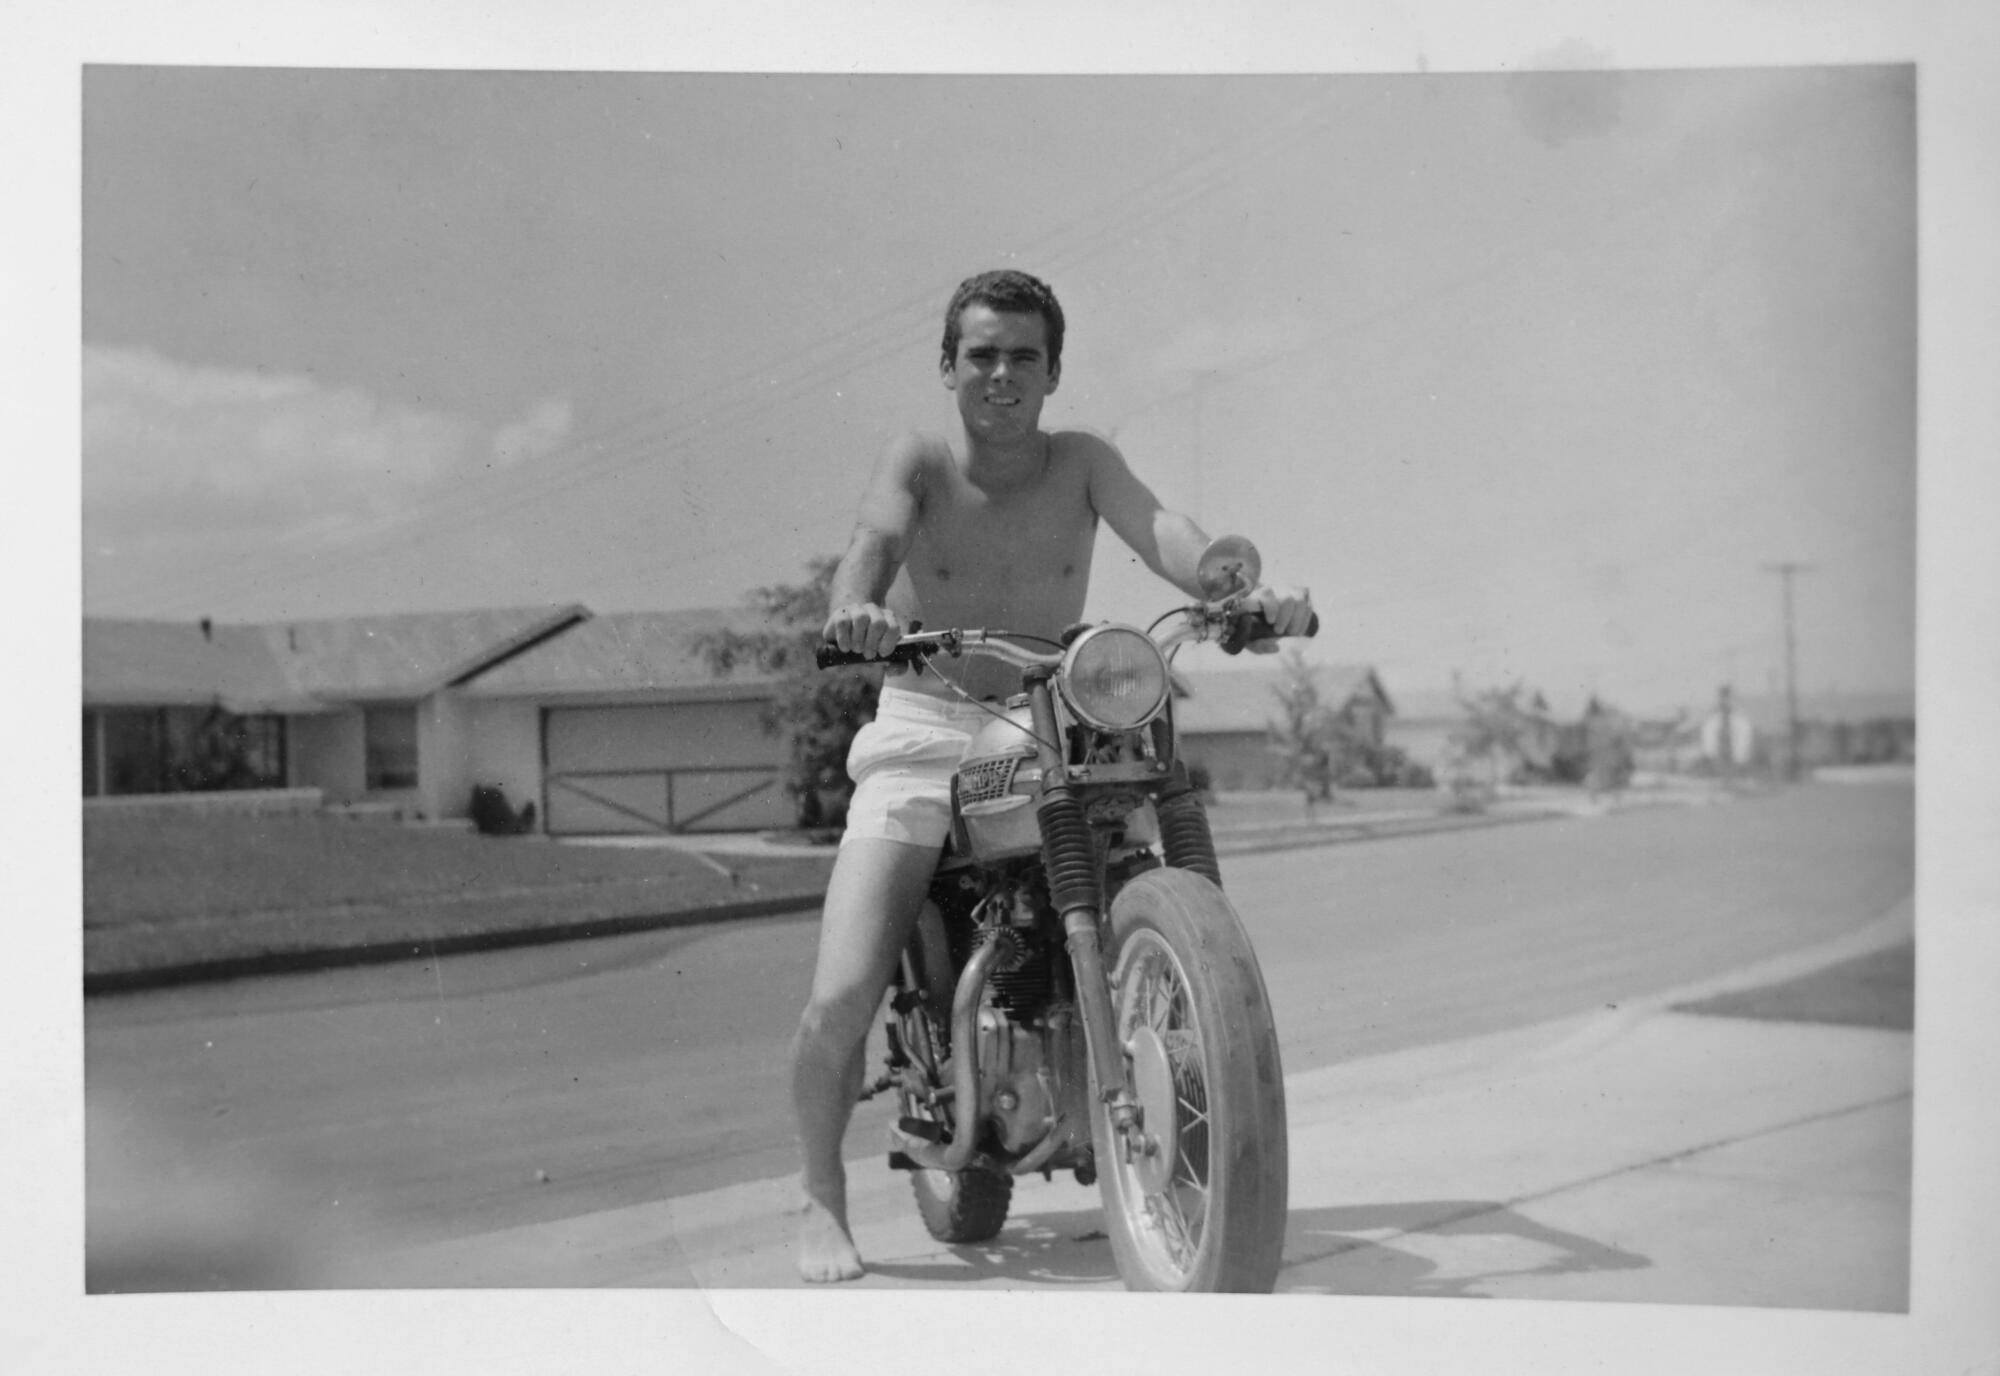 Black and white photo of a young man on a motorcycle